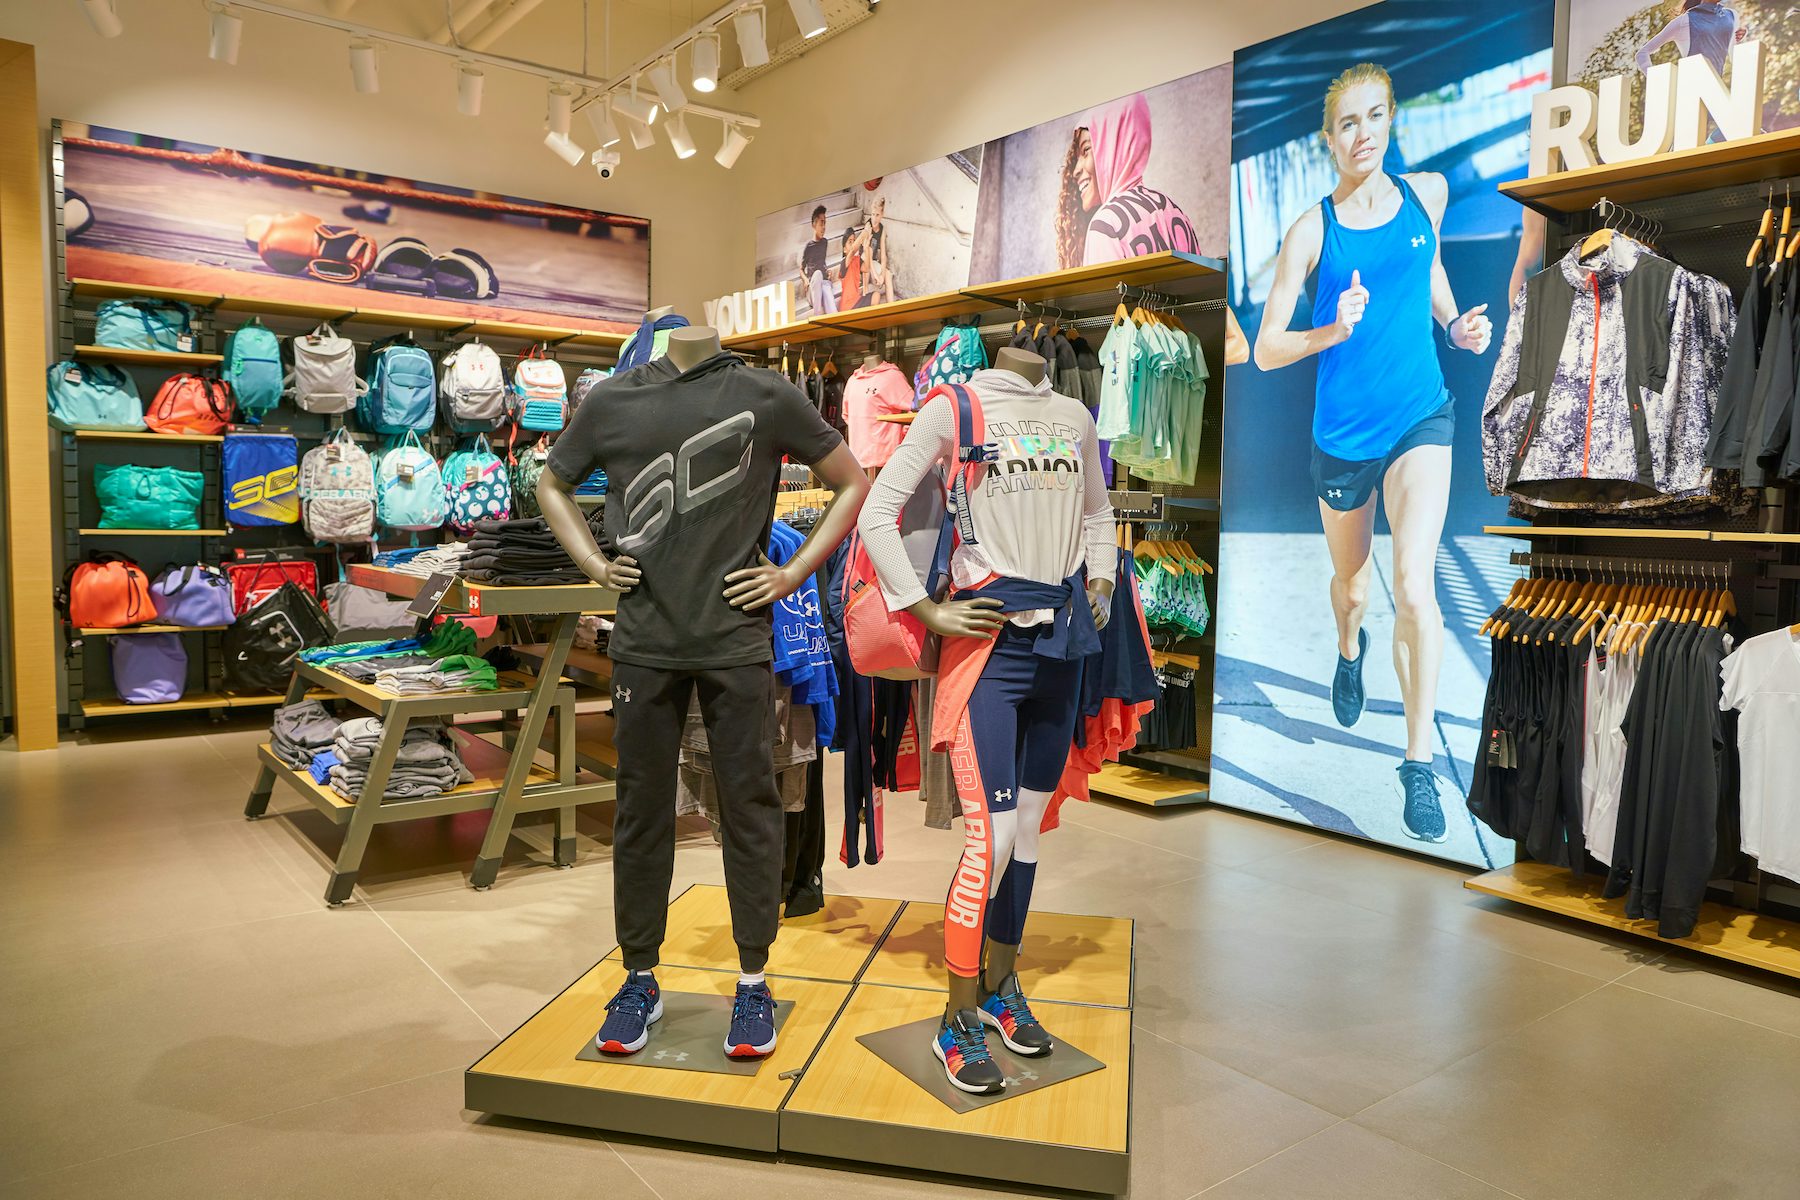 under armour usa store